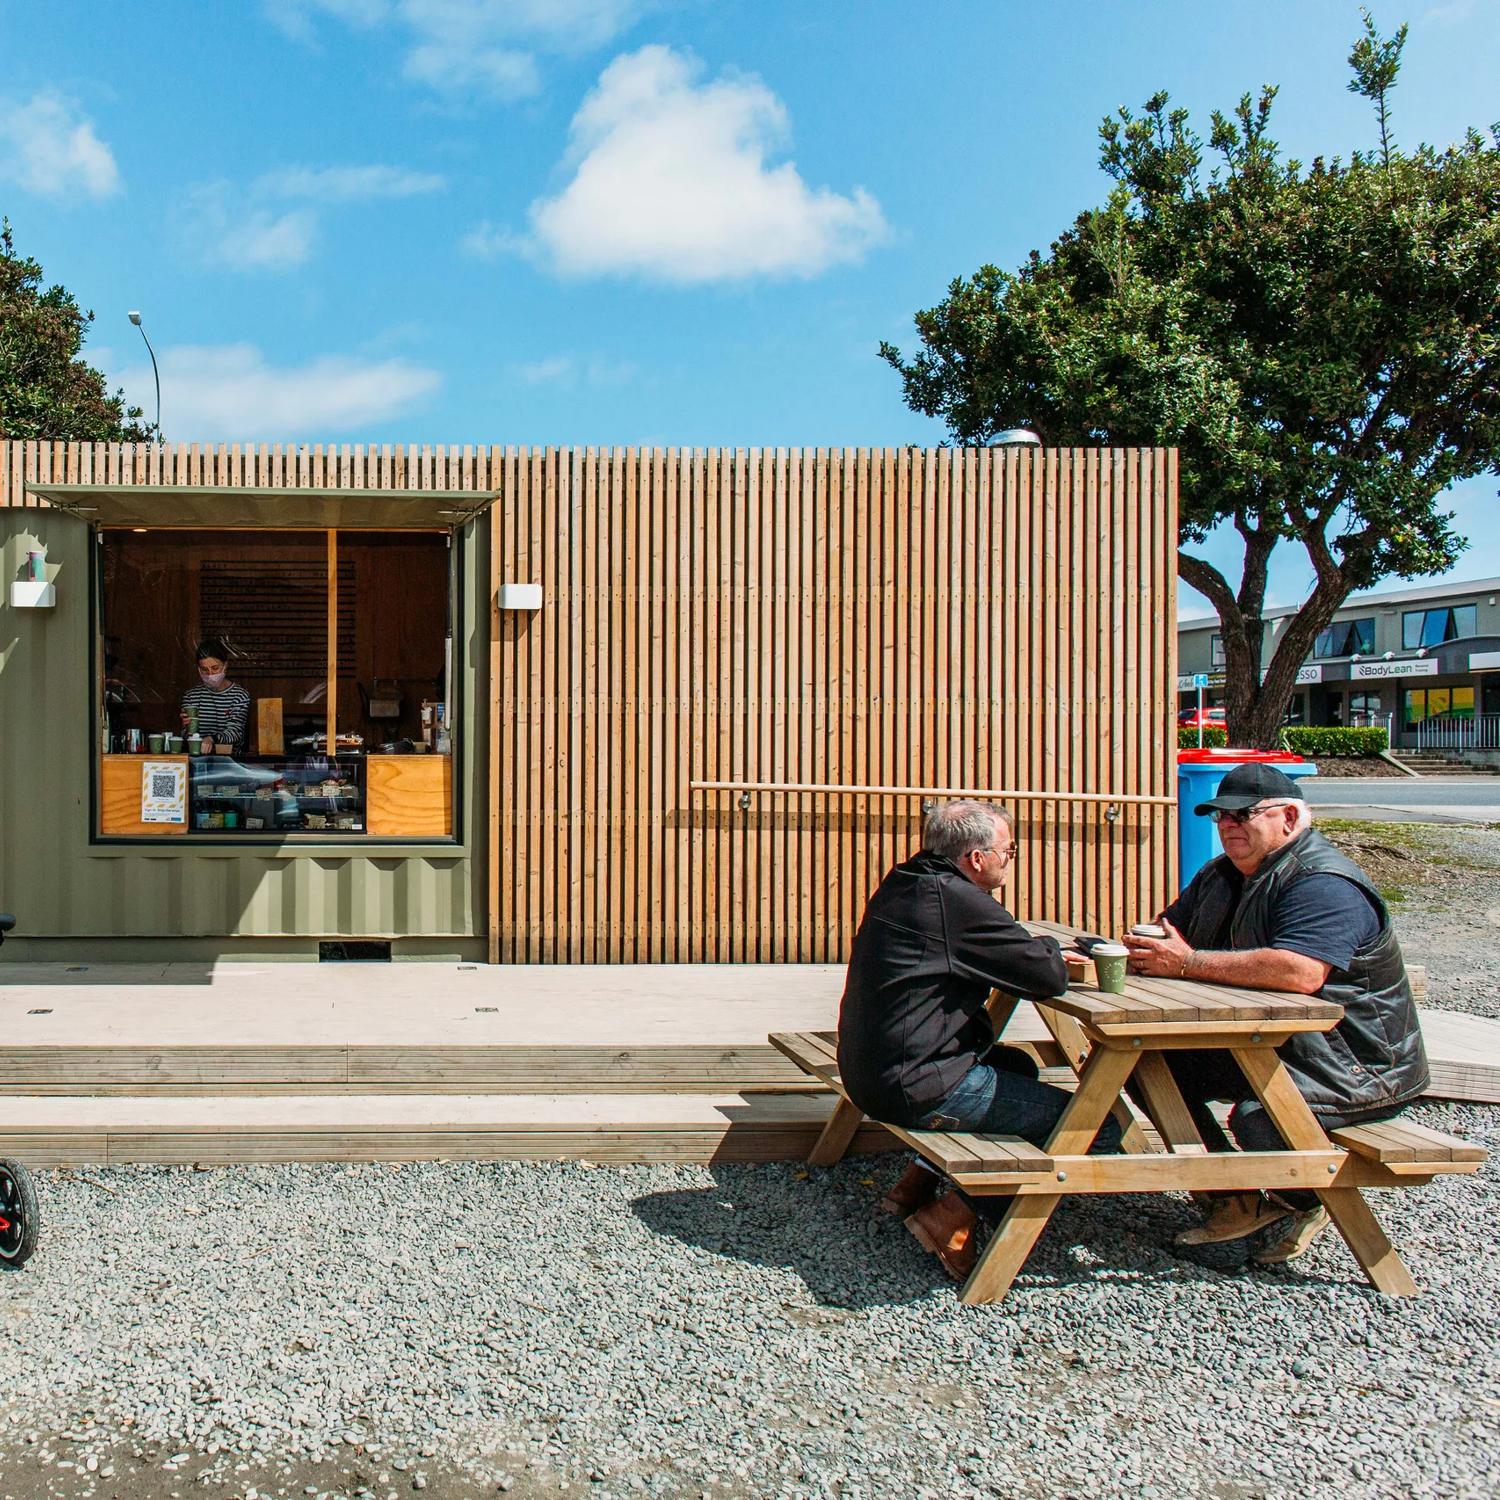 Little Green Olive, a cafe in Porirua inside a green shipping container, with people eating on picnic tables outside.